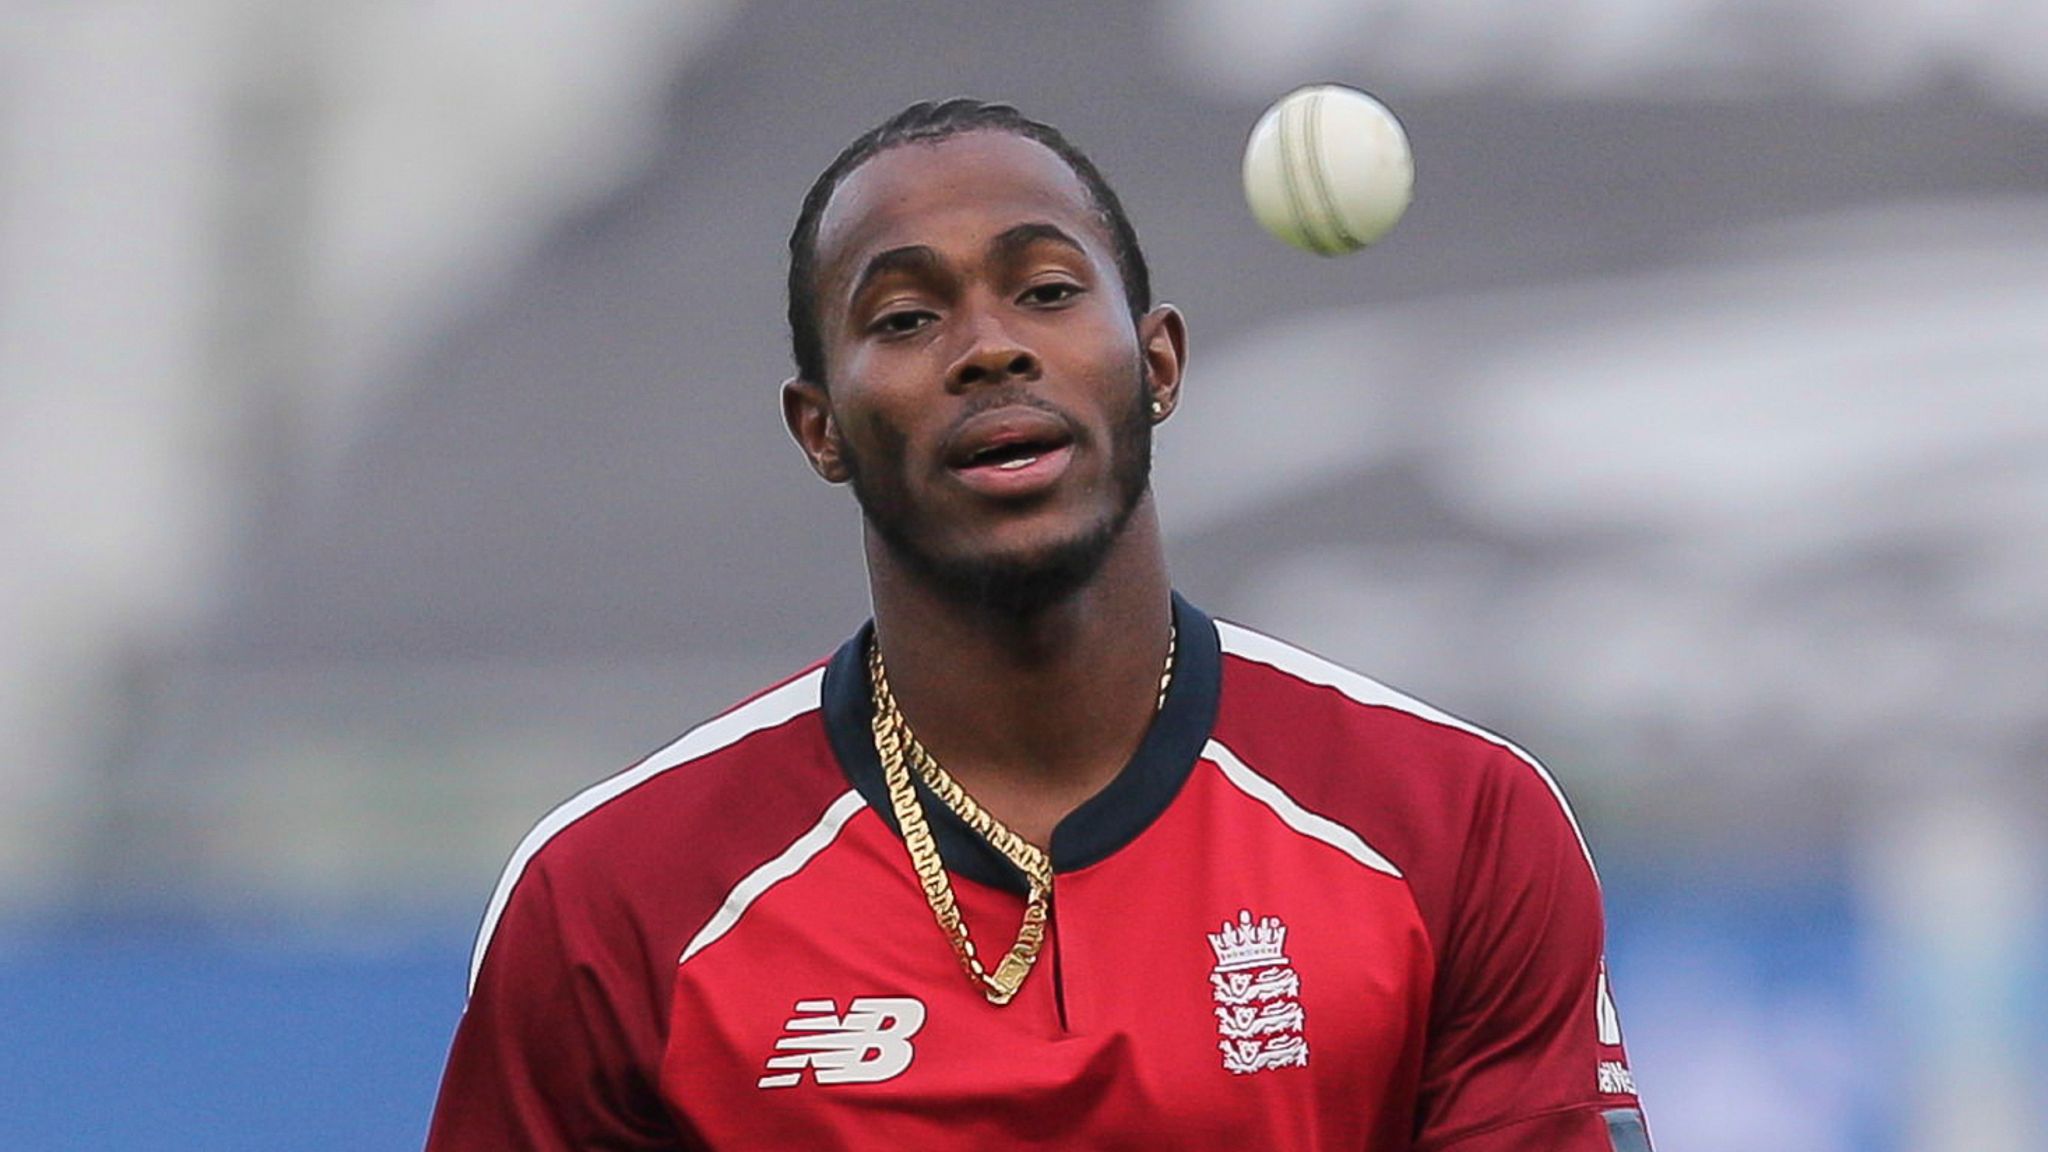 Yash Dhull named Jofra Archer as his pick of bowler he would like to face in IPL | Sky Sports